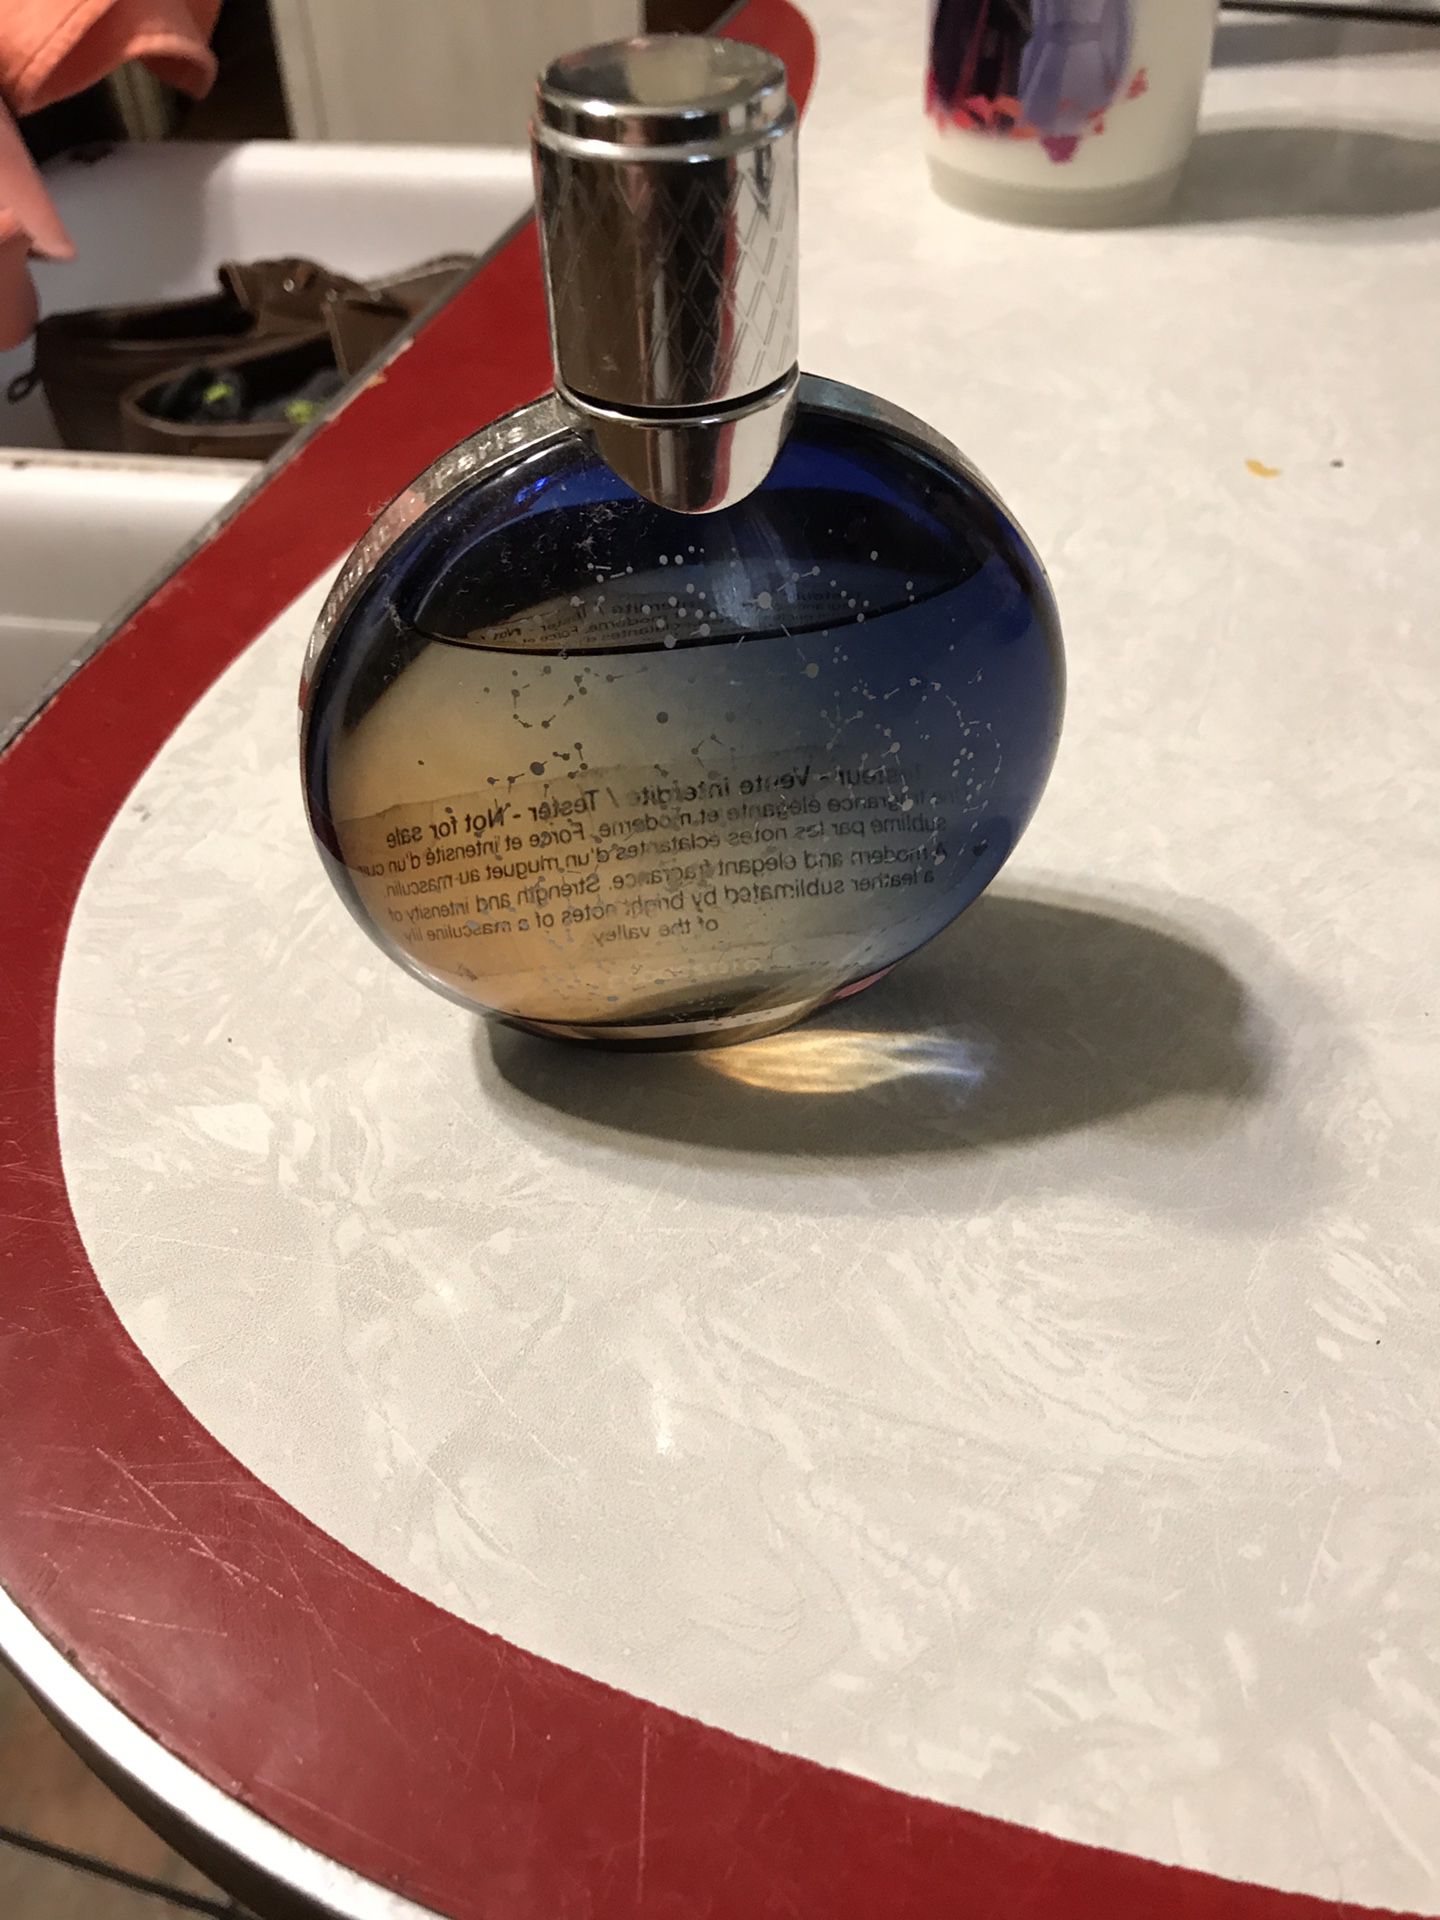 Midnight in Paris fragrance 4.2 discontinued!! for $145